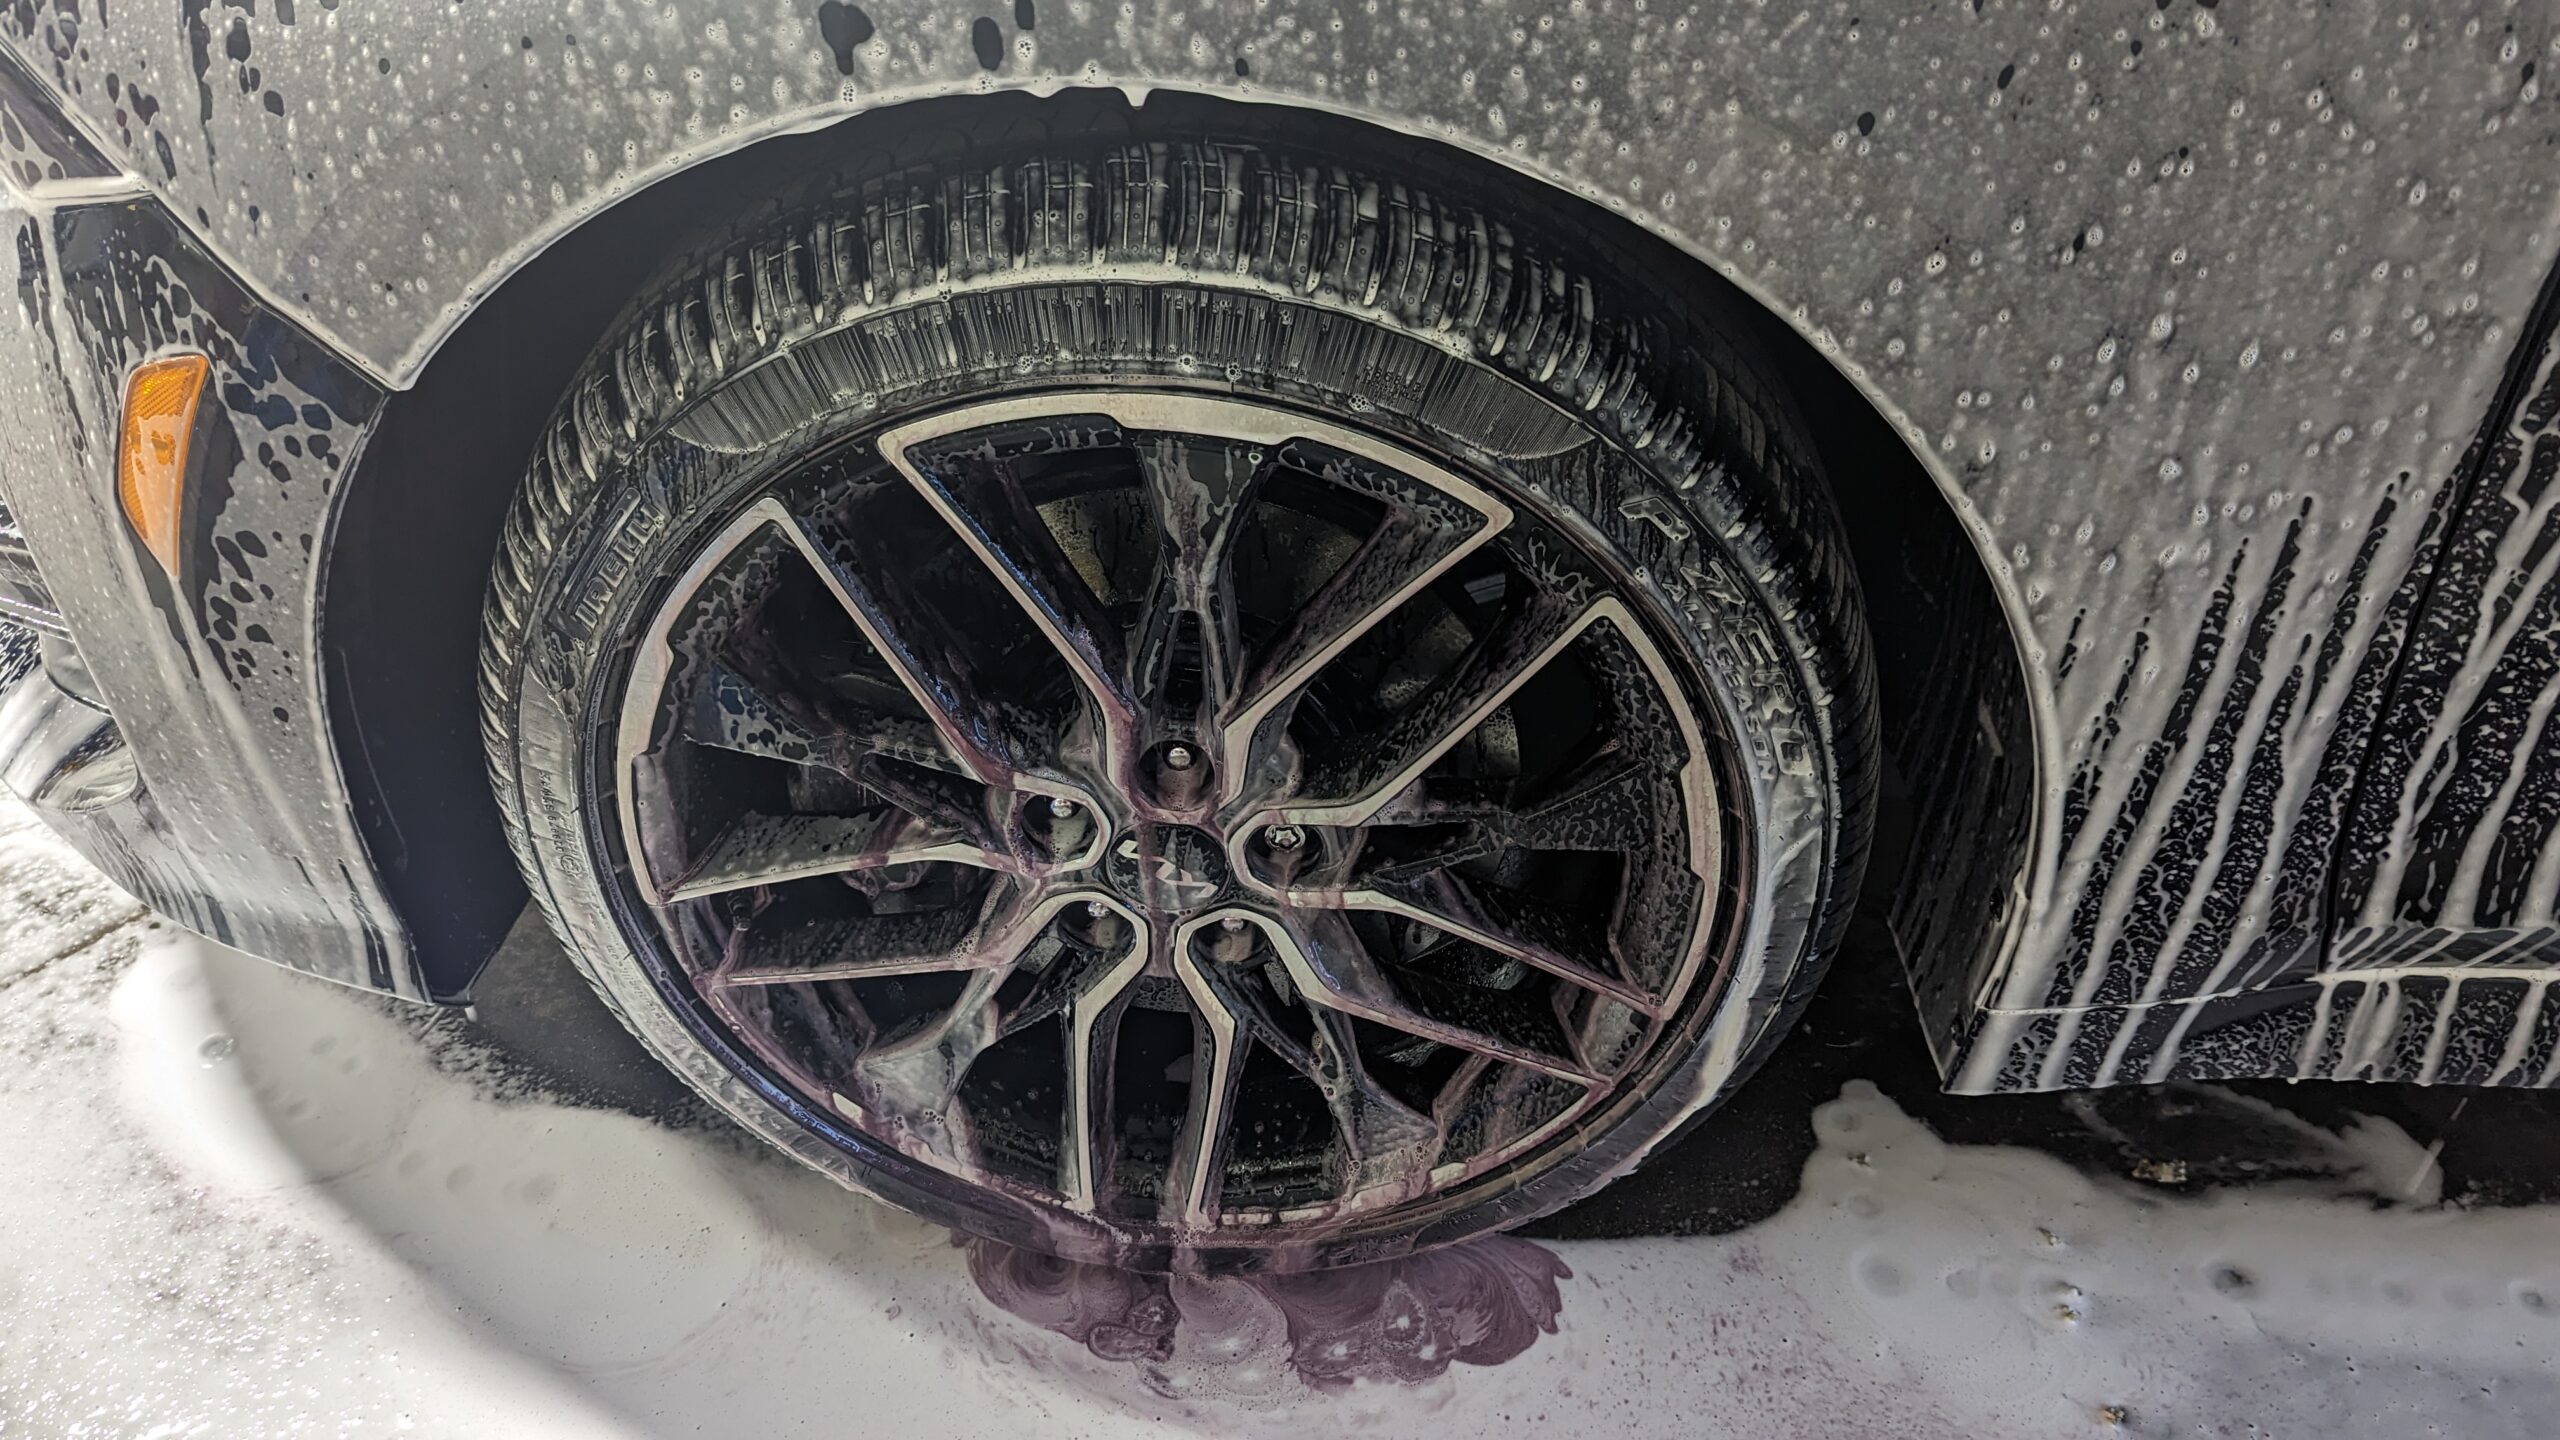 Downfall of Ceramic Coating - You actually have to wash your car.